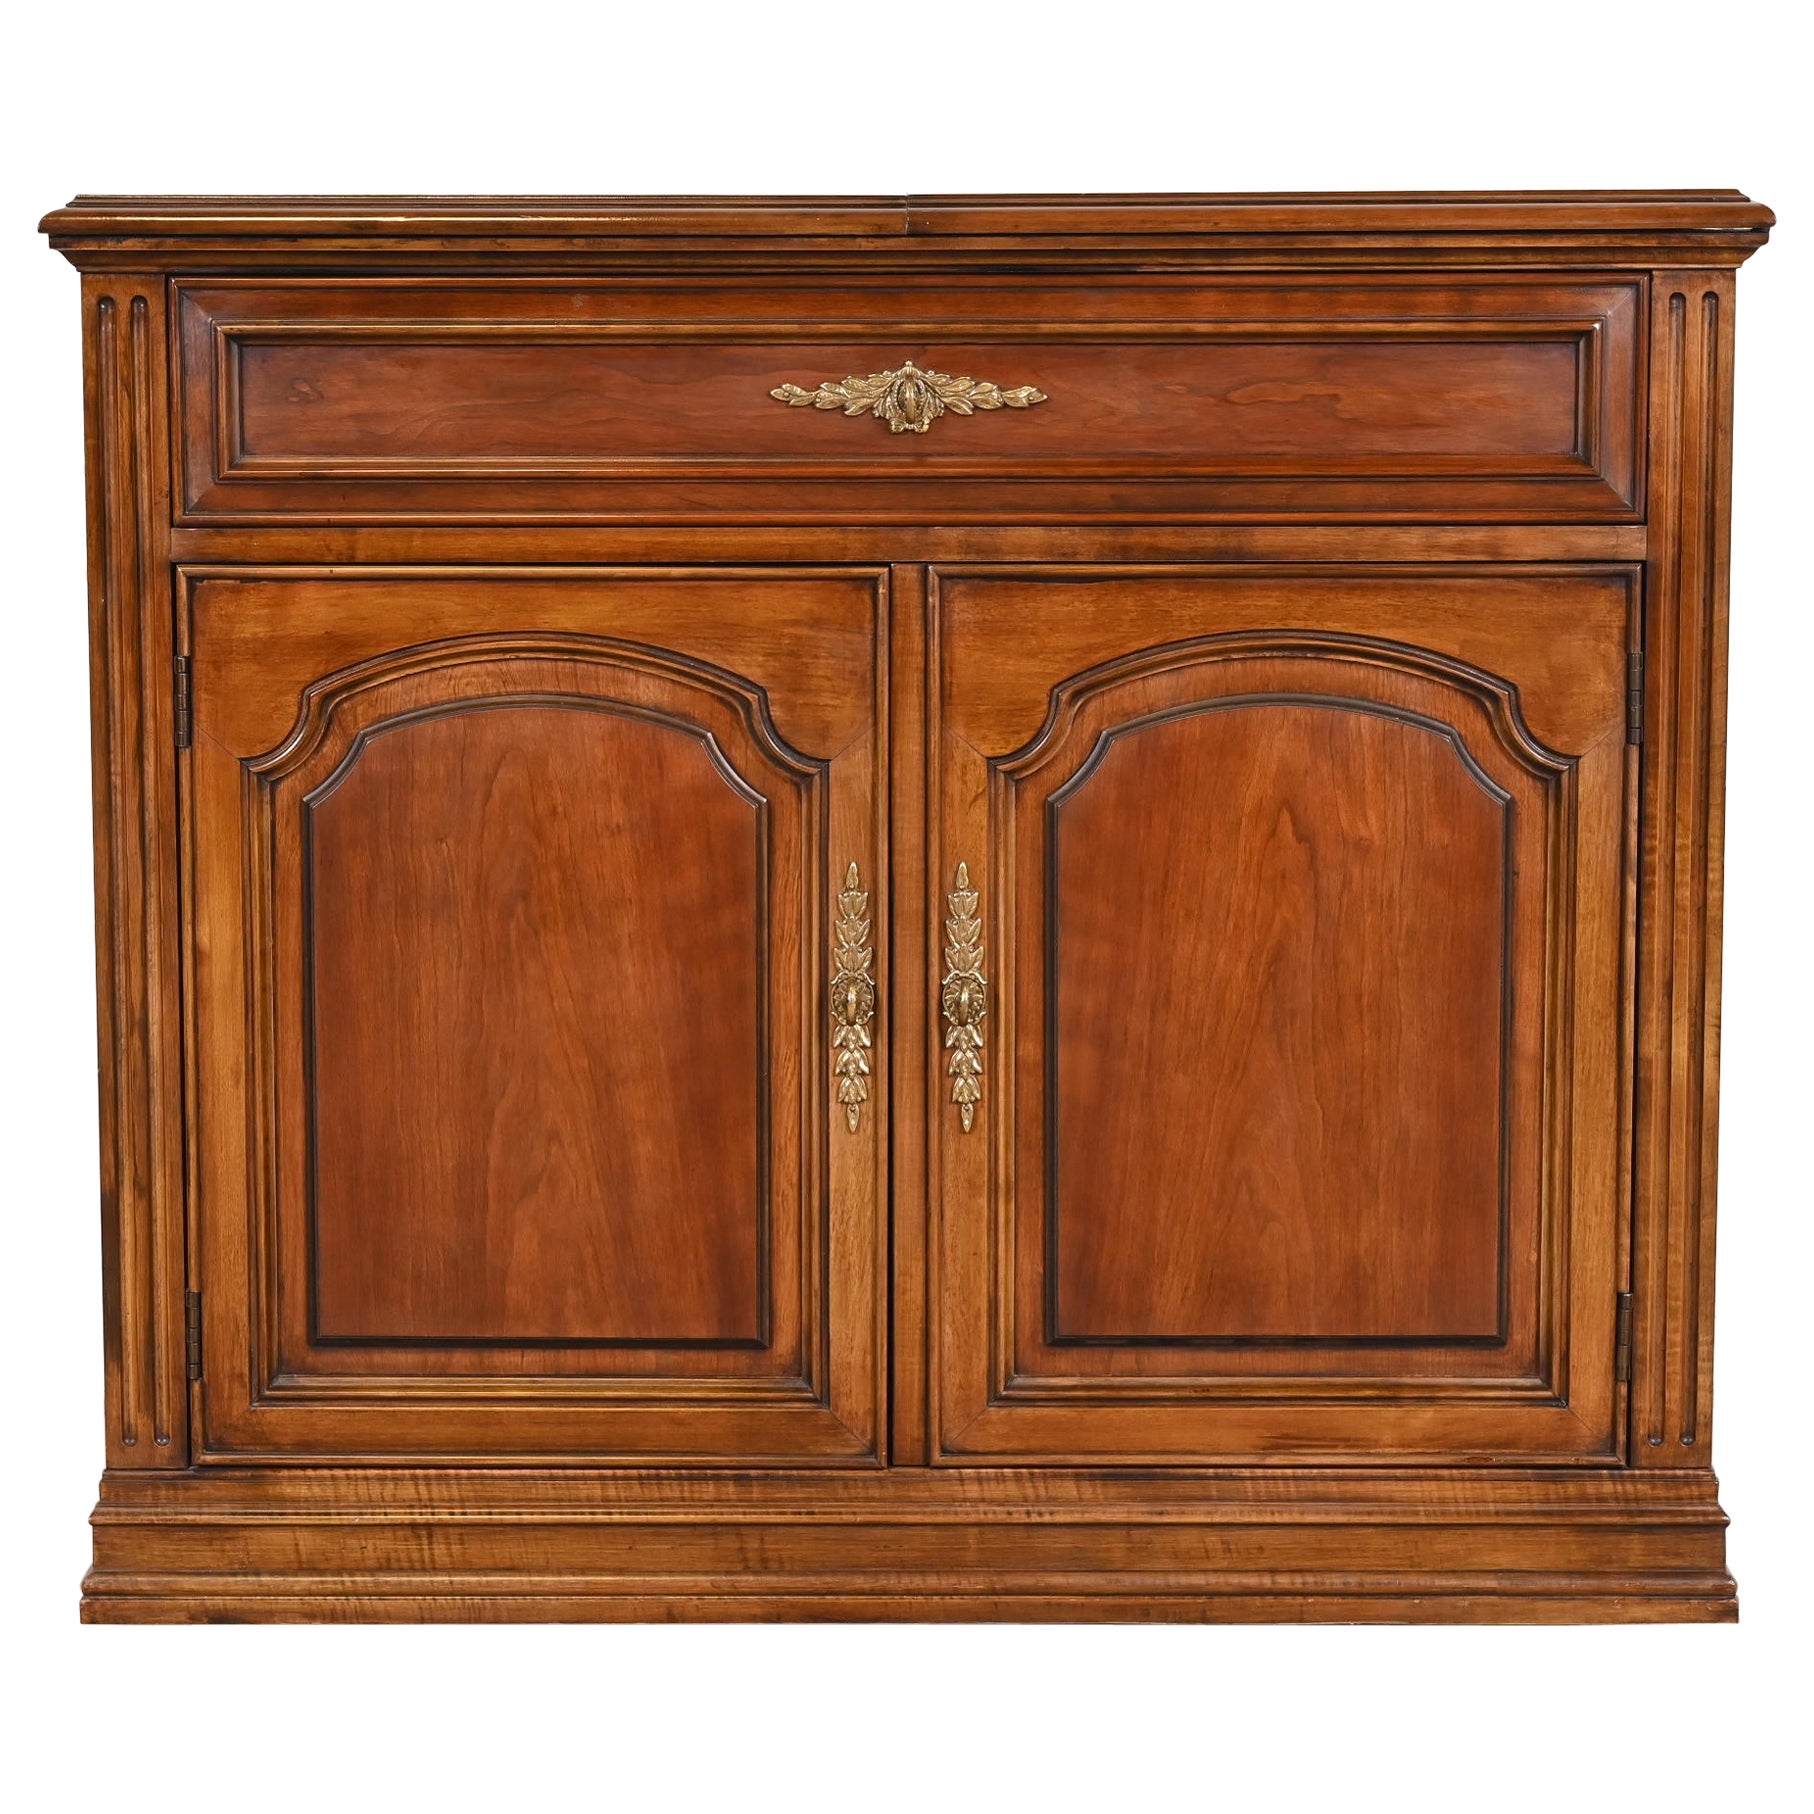 French Regency Louis XVI Cherry Wood Fliptop Bar Cabinet by White Furniture For Sale